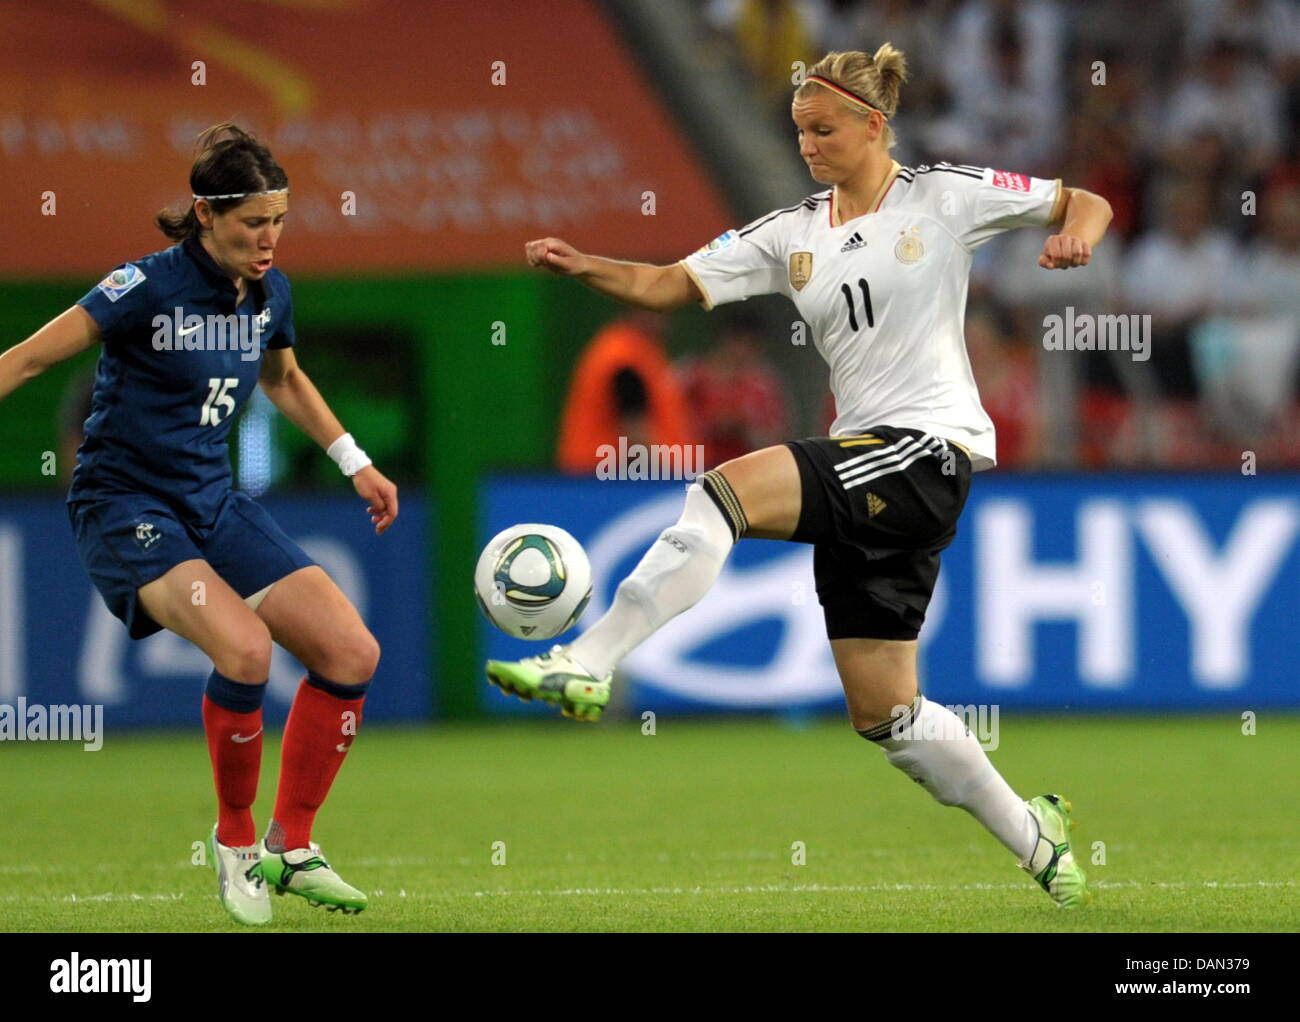 Elise Bussaglia of France and Alexandra Popp (R) of Germany fight for the ball during the Group A match France against Germany of FIFA Women's World Cup soccer tournament at the Borussia Park Stadium in Monchengladbach, Germany, 05 July 2011. Germany won the match with 4-2. Foto: Federico Gambarini dpa/lnw Stock Photo